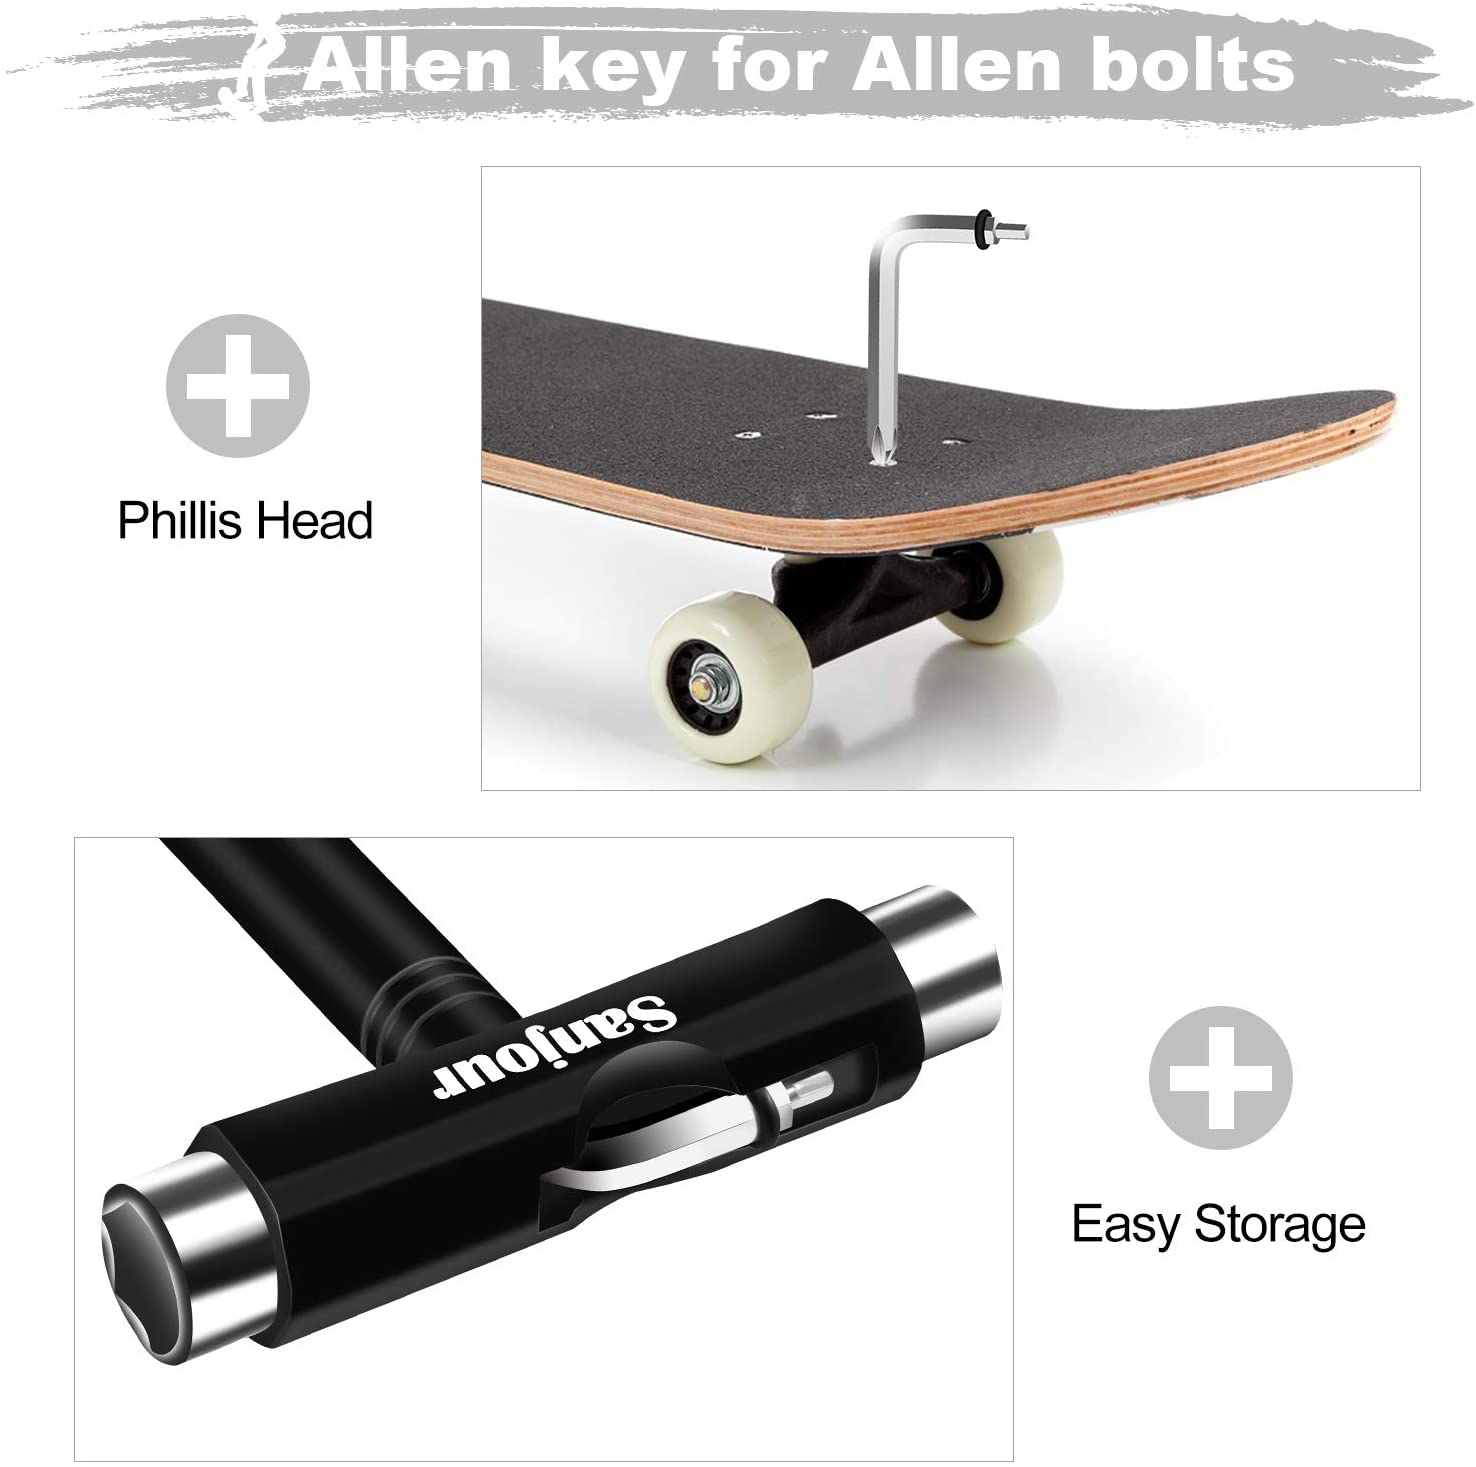 Sanjour All-in-One Skate Tools Multi-Function Portable Skateboard Tool Kit  Accessory with T-Type Allen Key and L-Type Phillips Head Screwdriver for  Roller Skates/Skateboard-2 Packs (Cool Black) - WHEELive